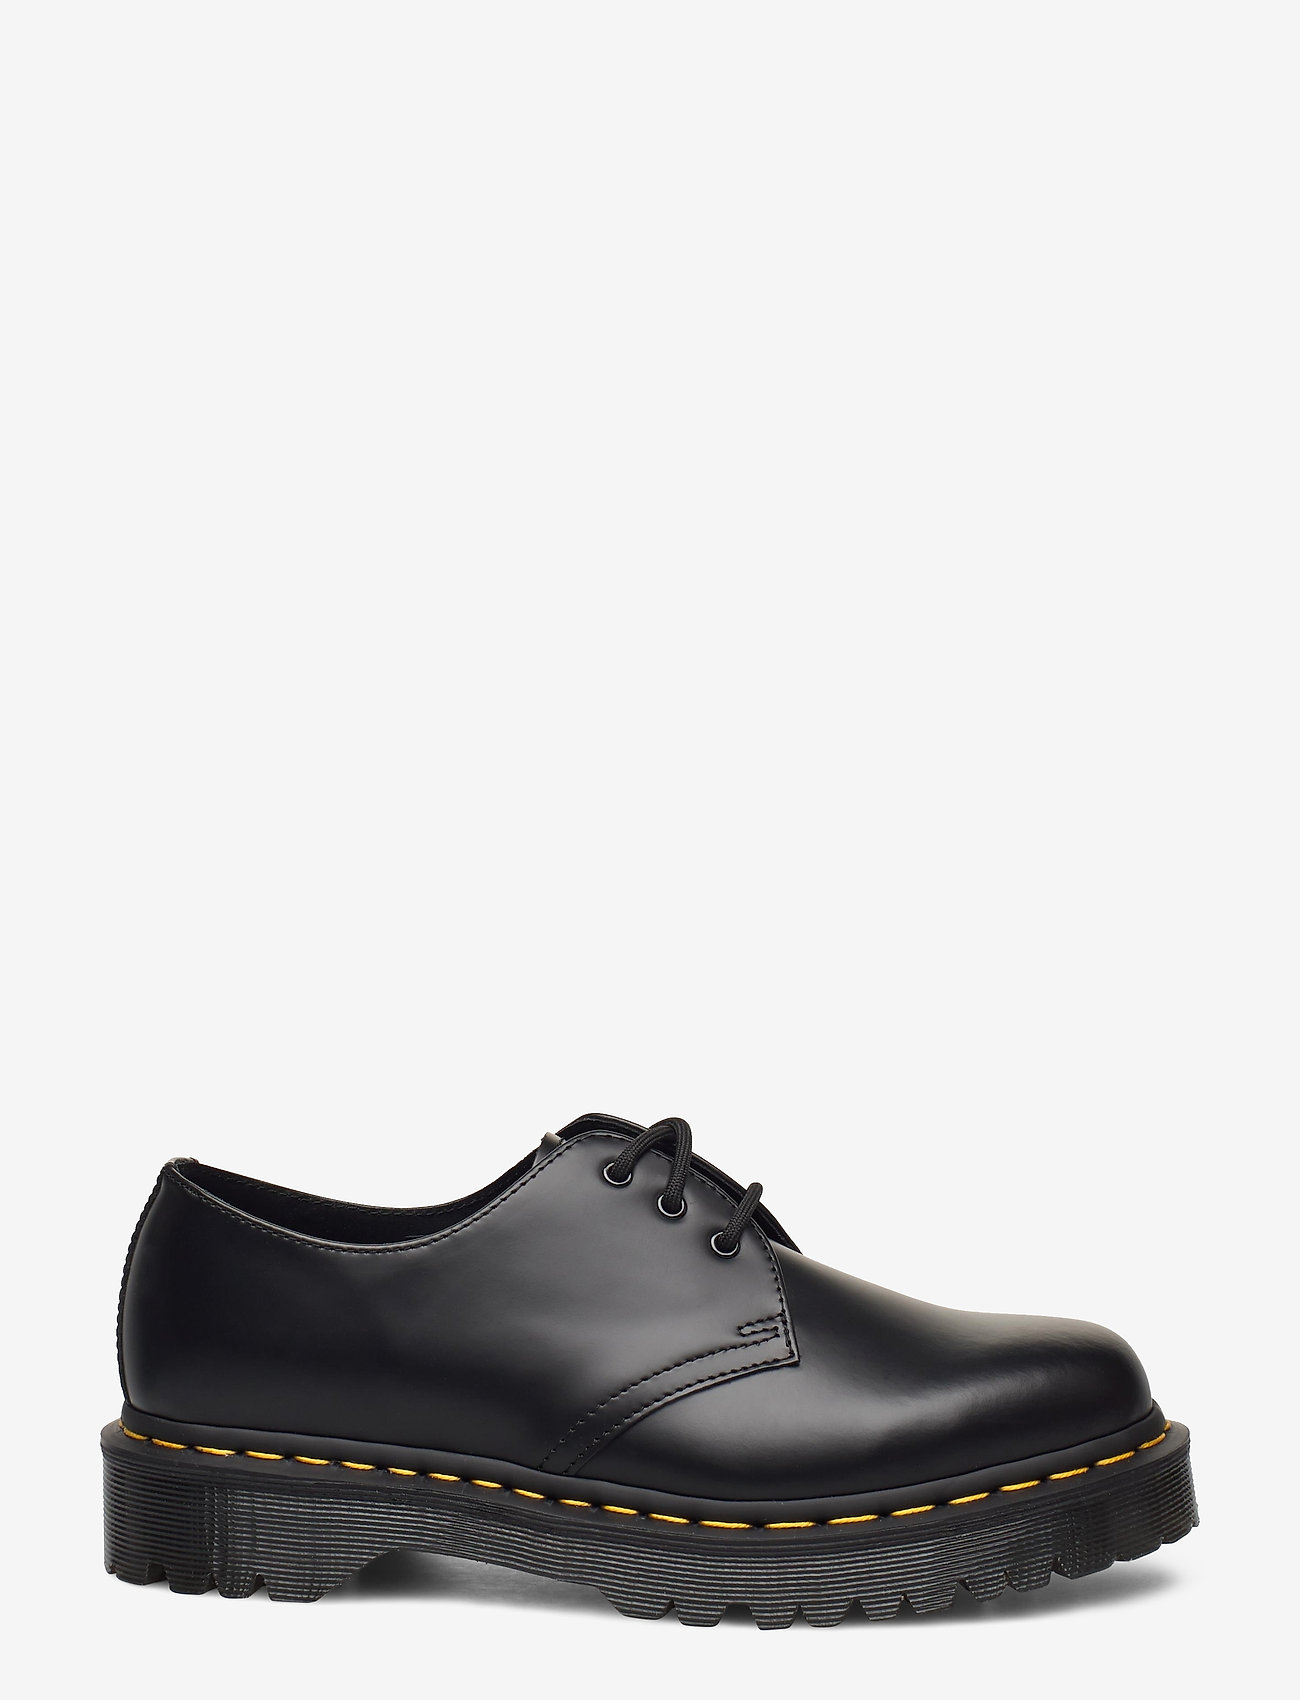 Dr. Martens - 1461 Bex Black Smooth - chaussures oxford - black - 4